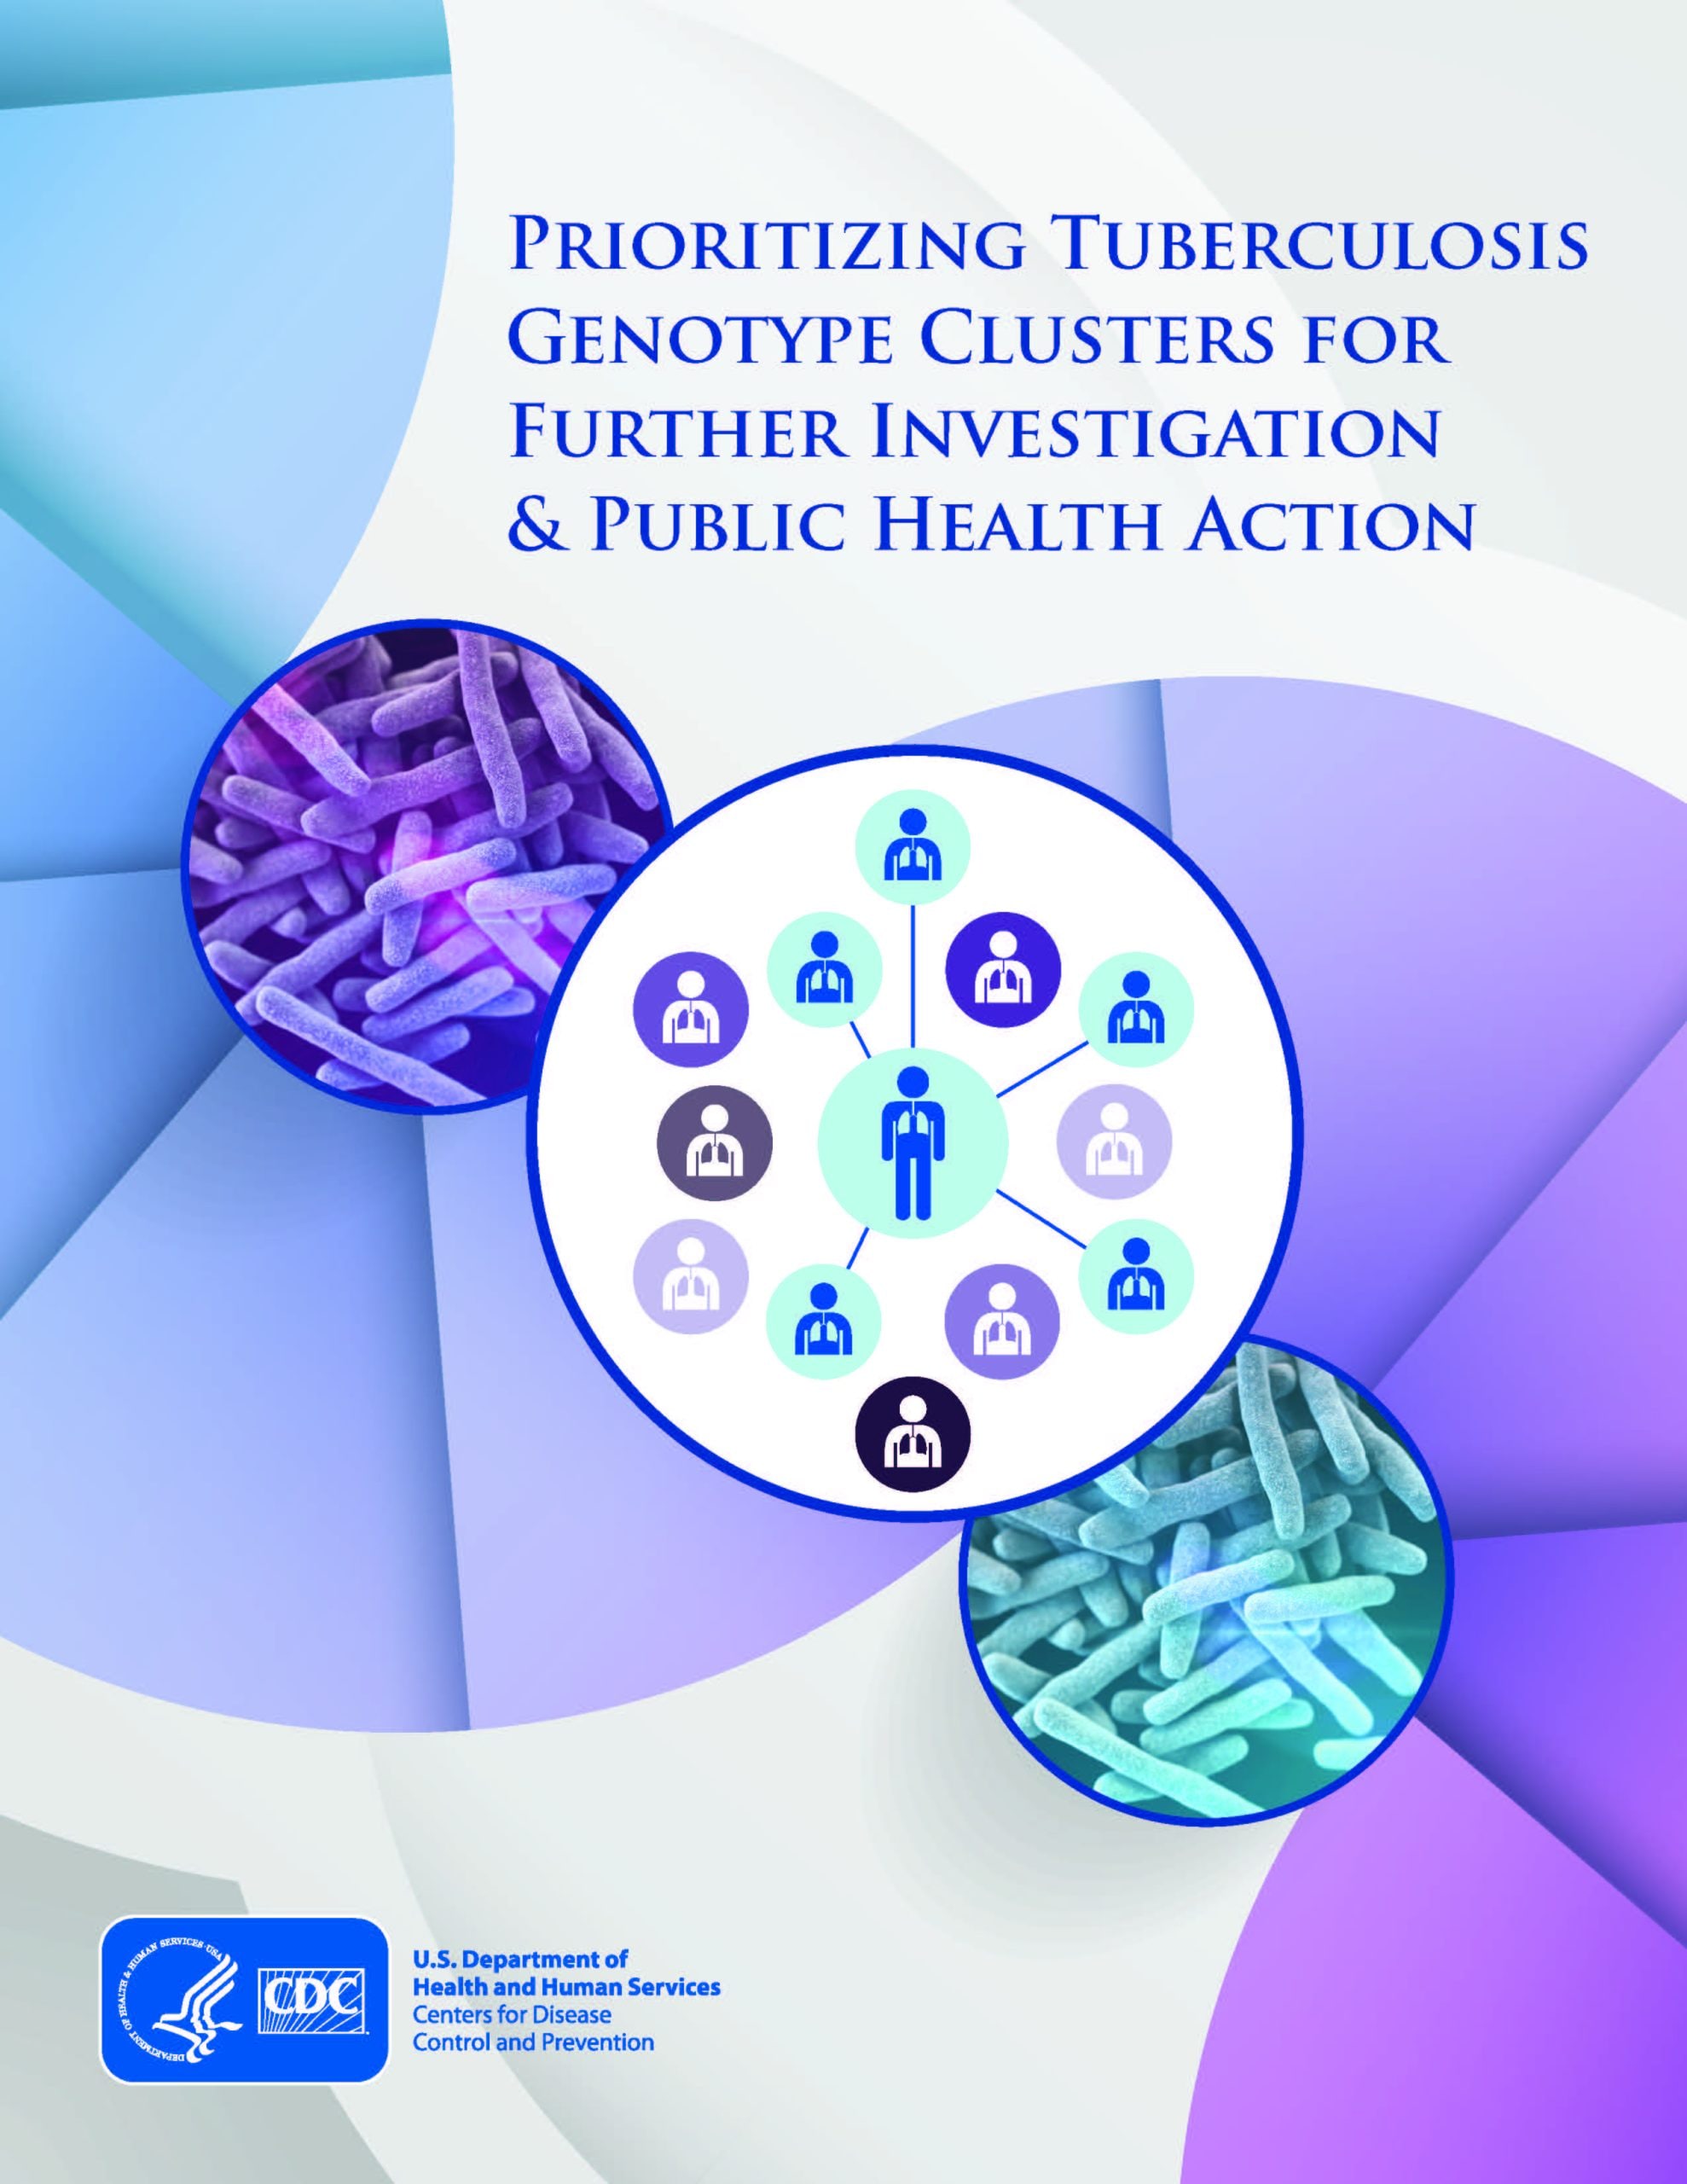 Prioritizing Tuberculosis Genotype Clusters for Further Investigation and Public Health Action is written in blue type. Two images of tuberculosis bacteria are shown with a network of people